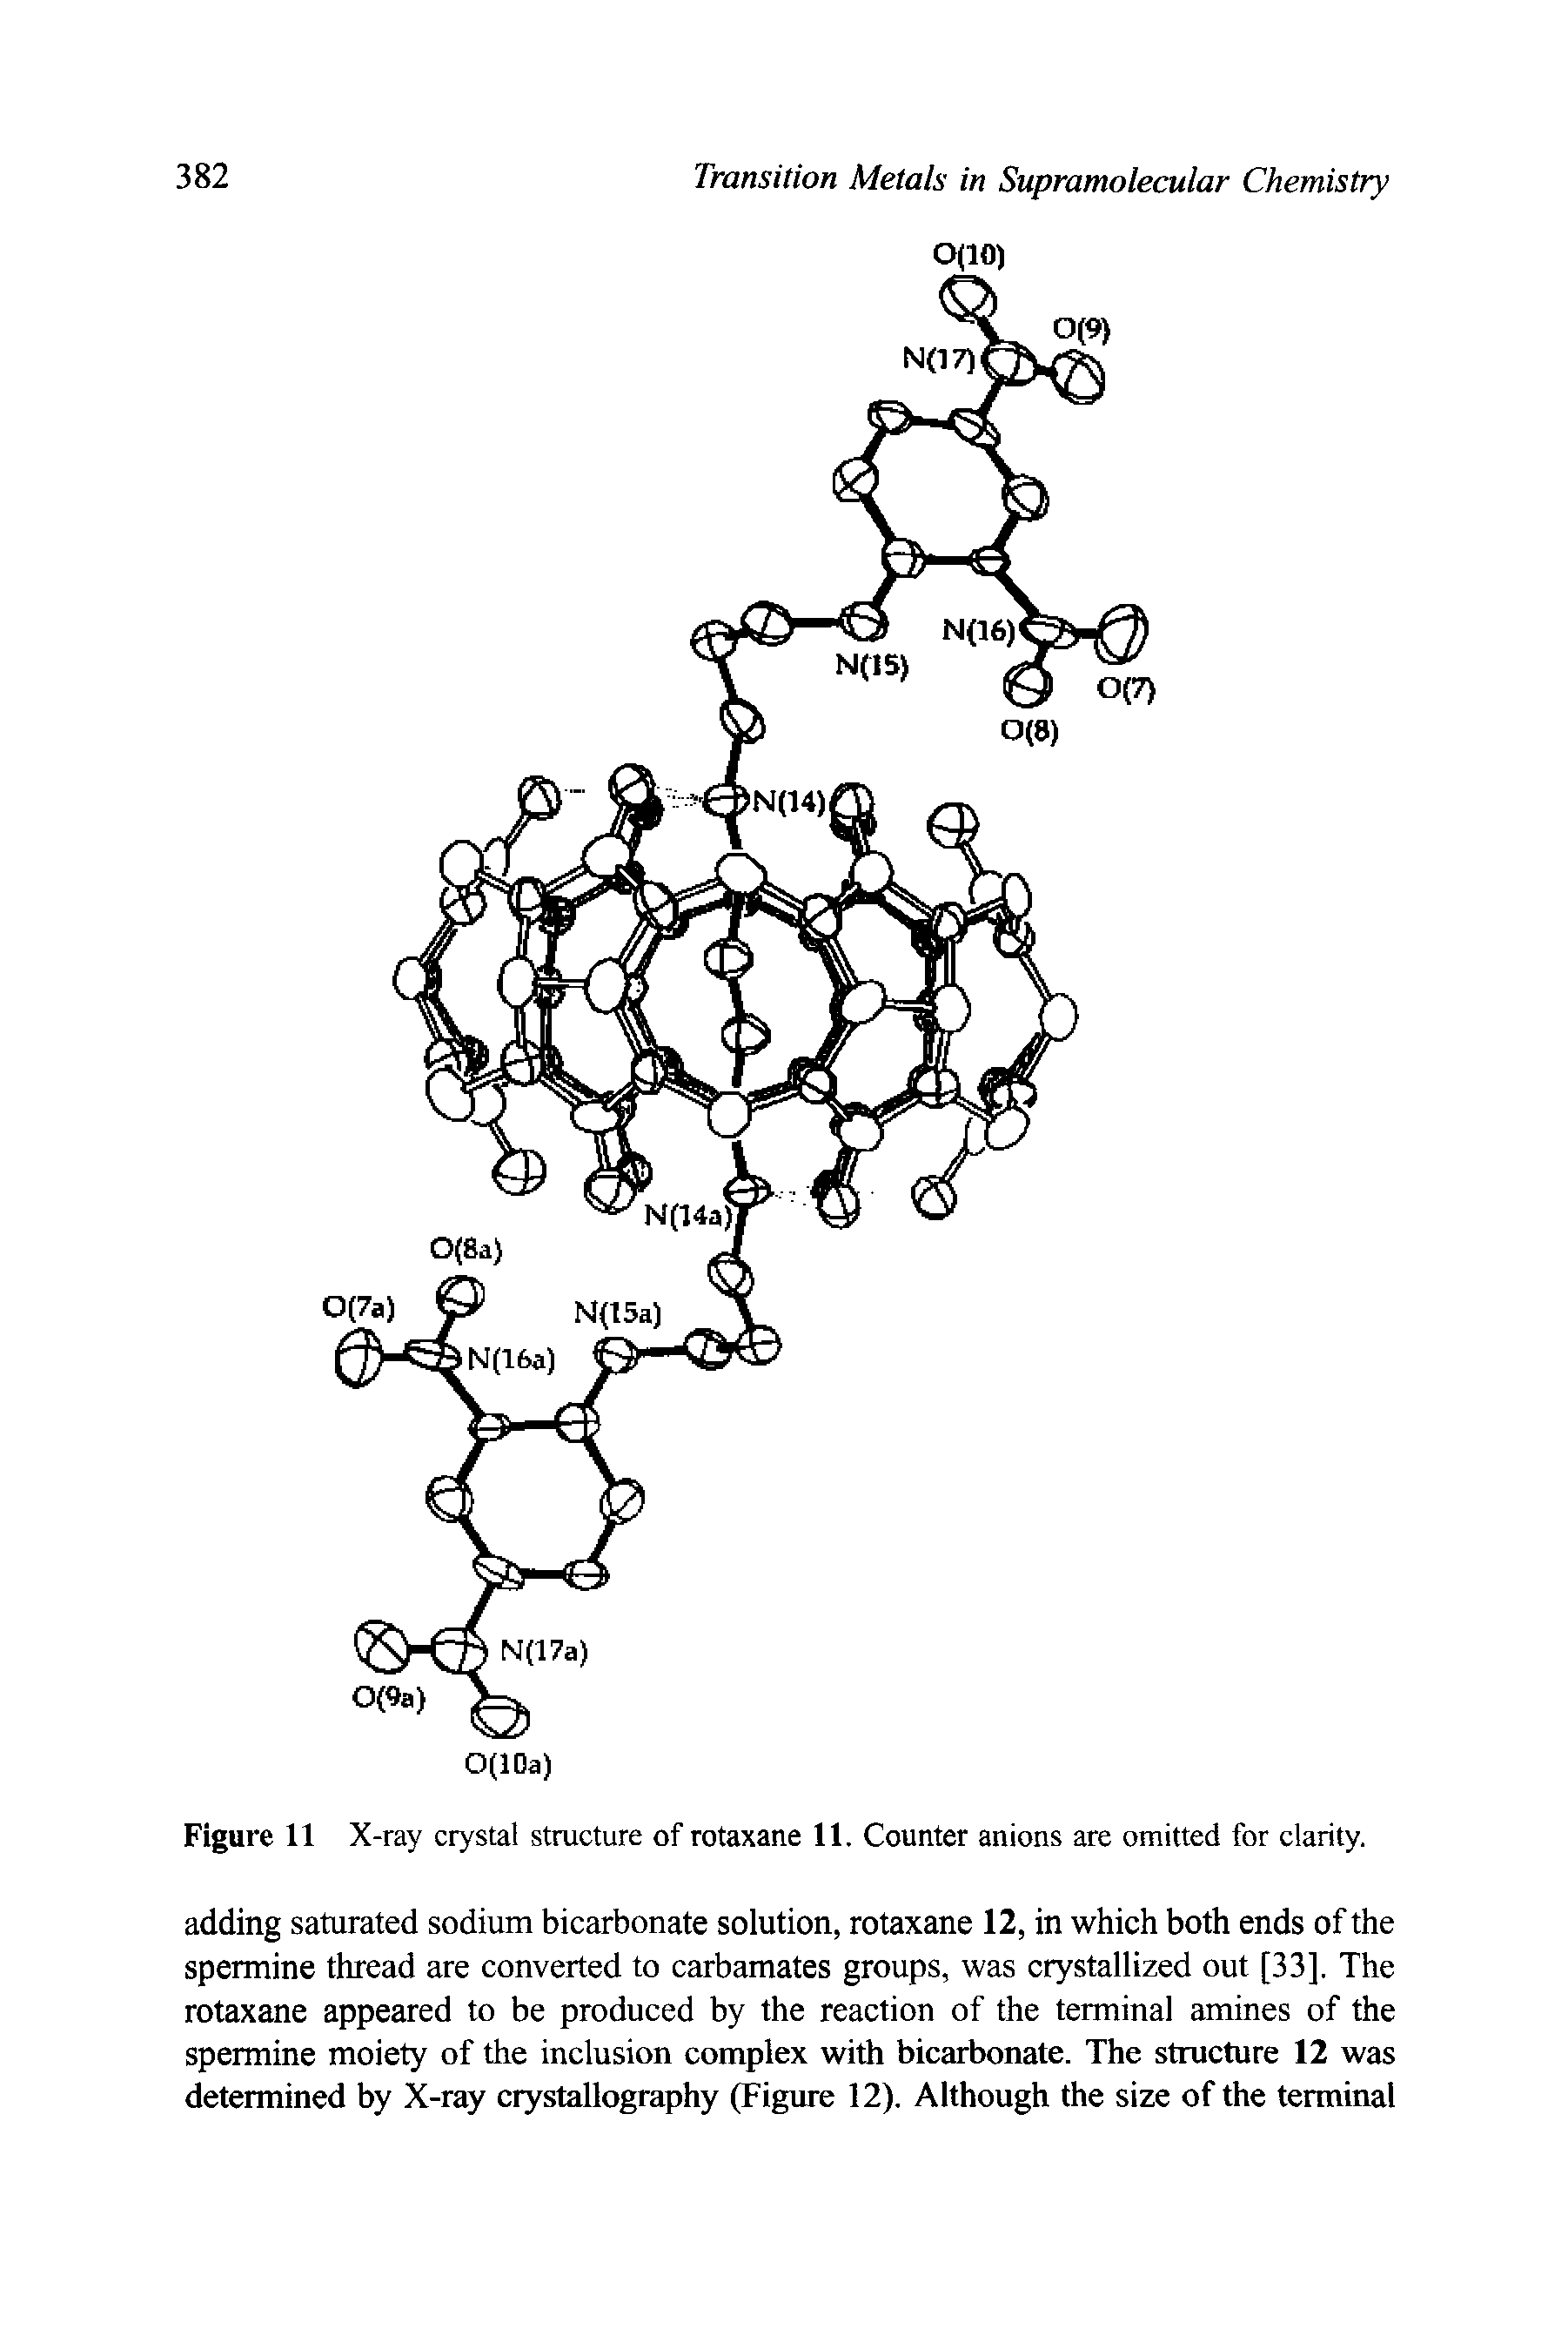 Figure 11 X-ray crystal structure of rotaxane 11. Counter anions are omitted for clarity.